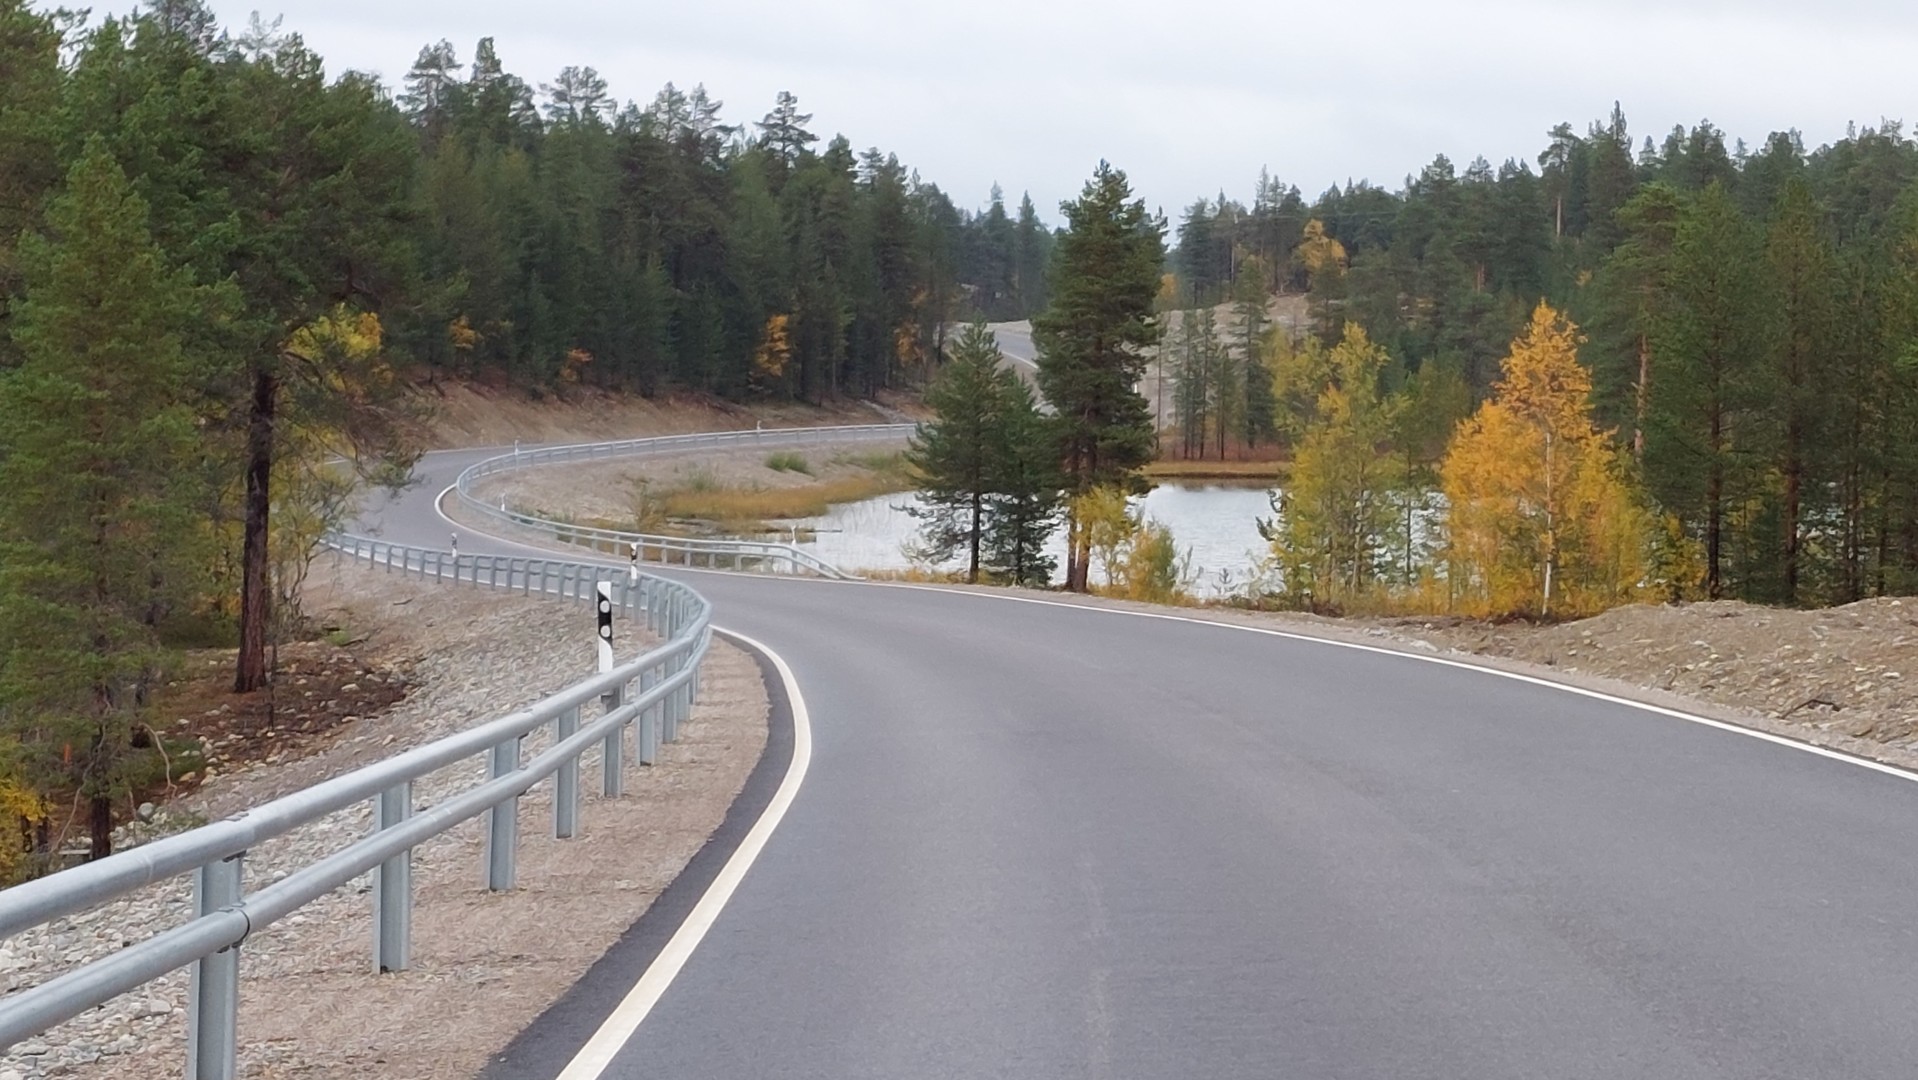 Photo of a curve in the road between Kaamanen and Kirkenes